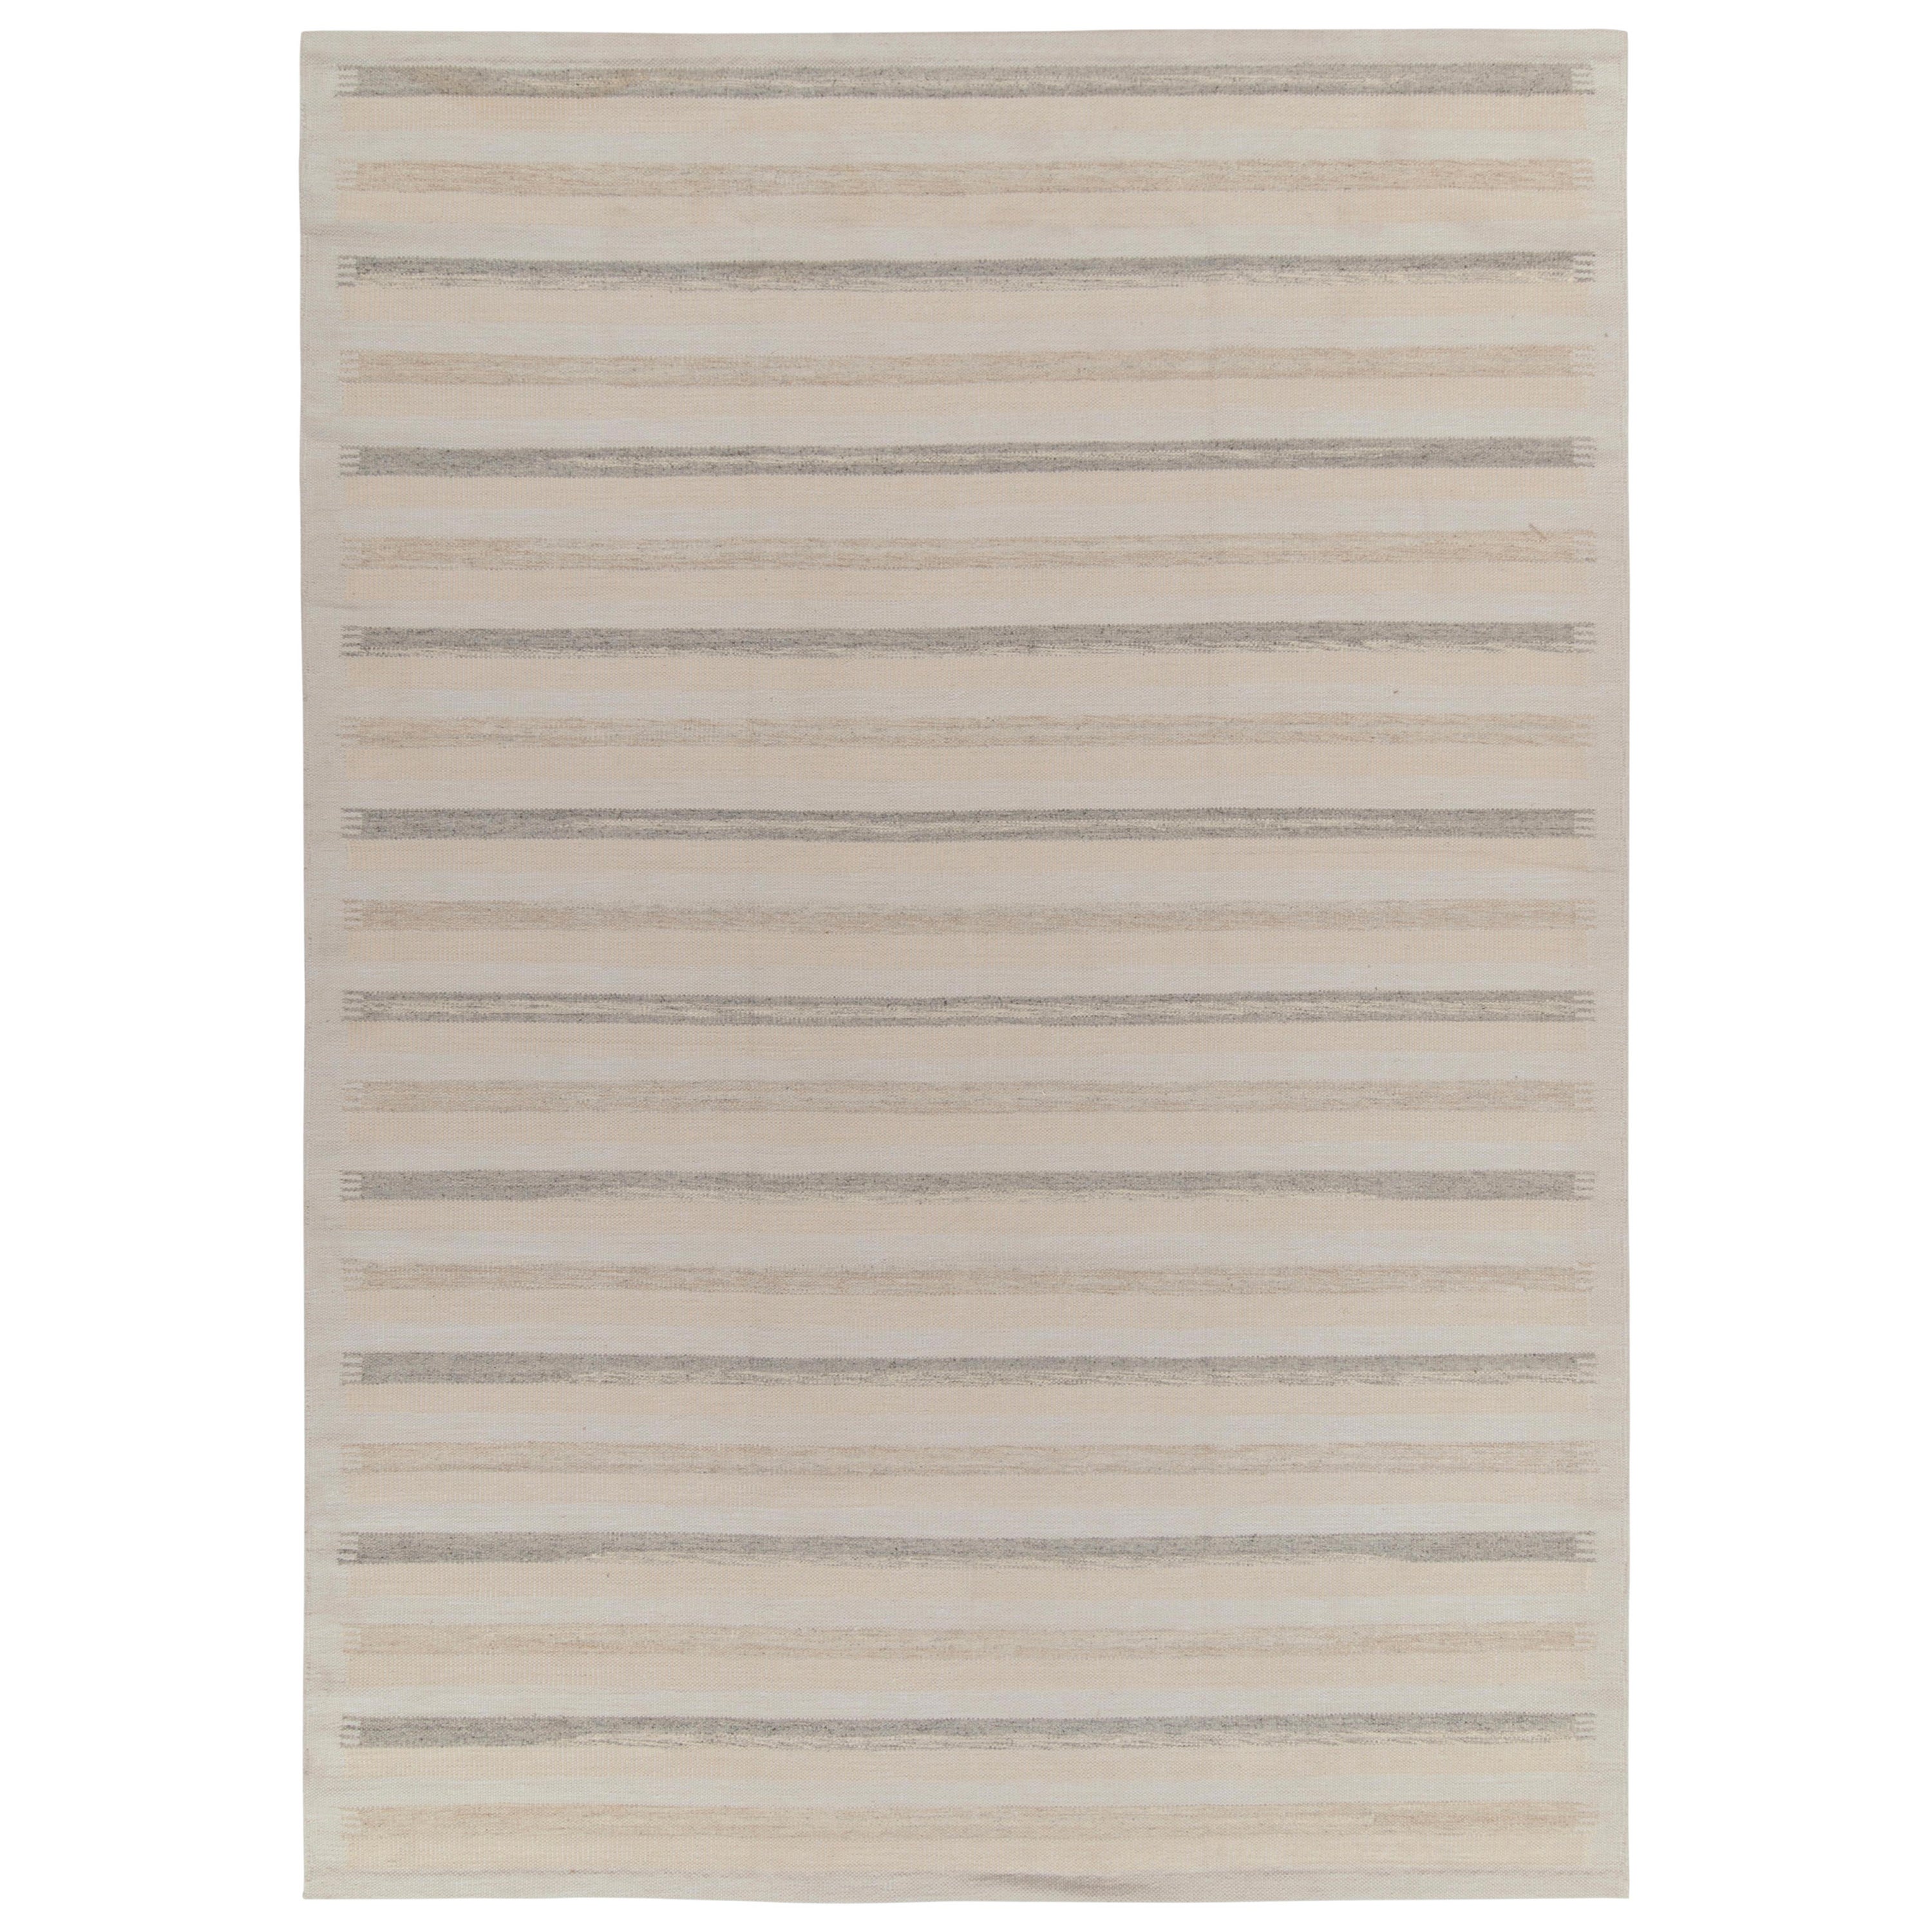 Rug & Kilim’s Scandinavian Style Kilim in White, Beige and Gray Stripes For Sale